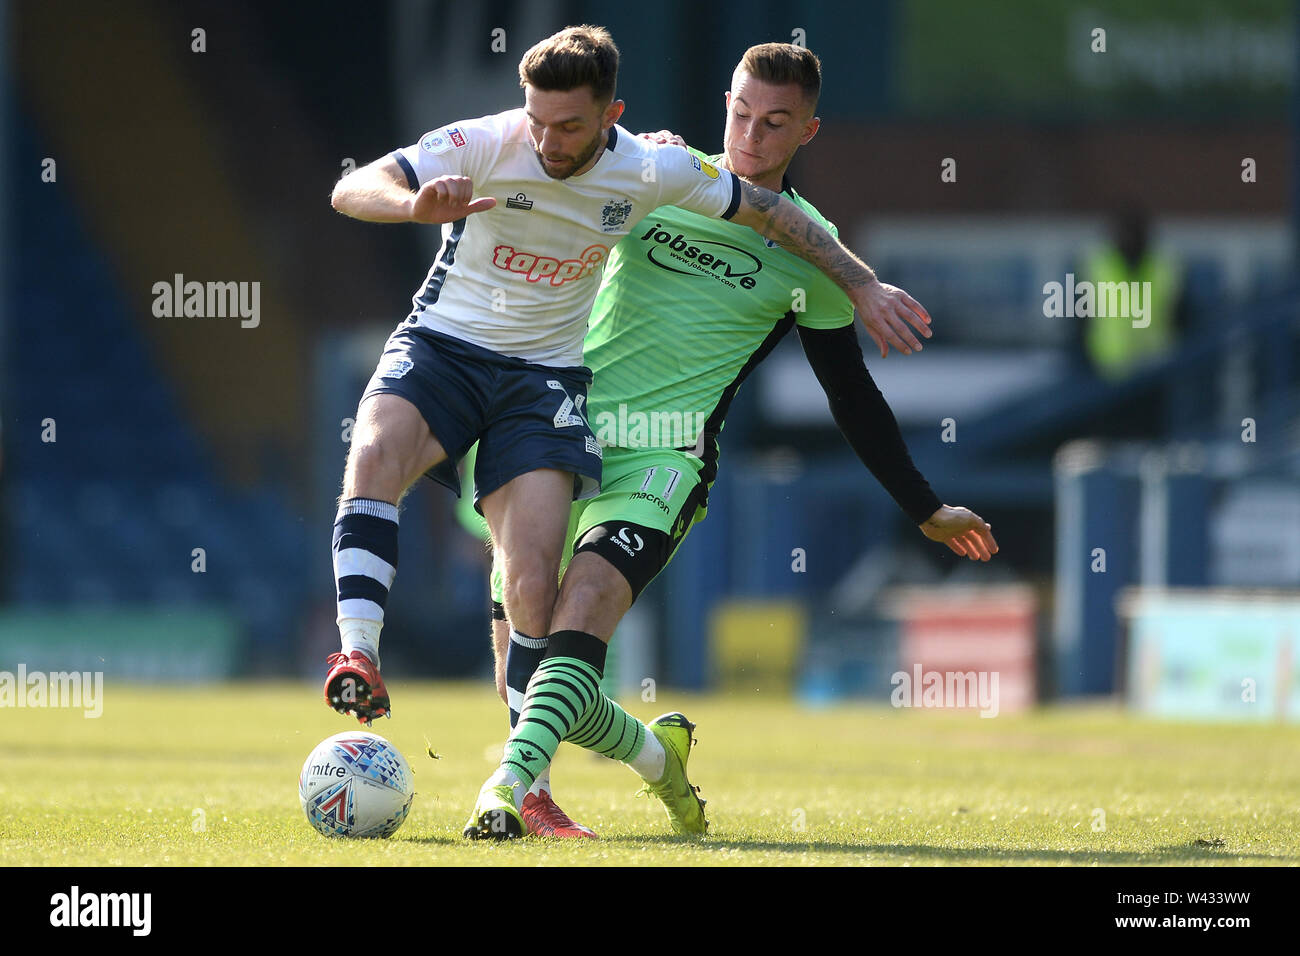 Jay O'Shea of Bury does battle with Brennan Dickenson of Colchester United - Bury v Colchester United, Sky Bet League Two, Gigg Lane, Bury - 13th April 2019  Editorial Use Only - DataCo restrictions apply Stock Photo